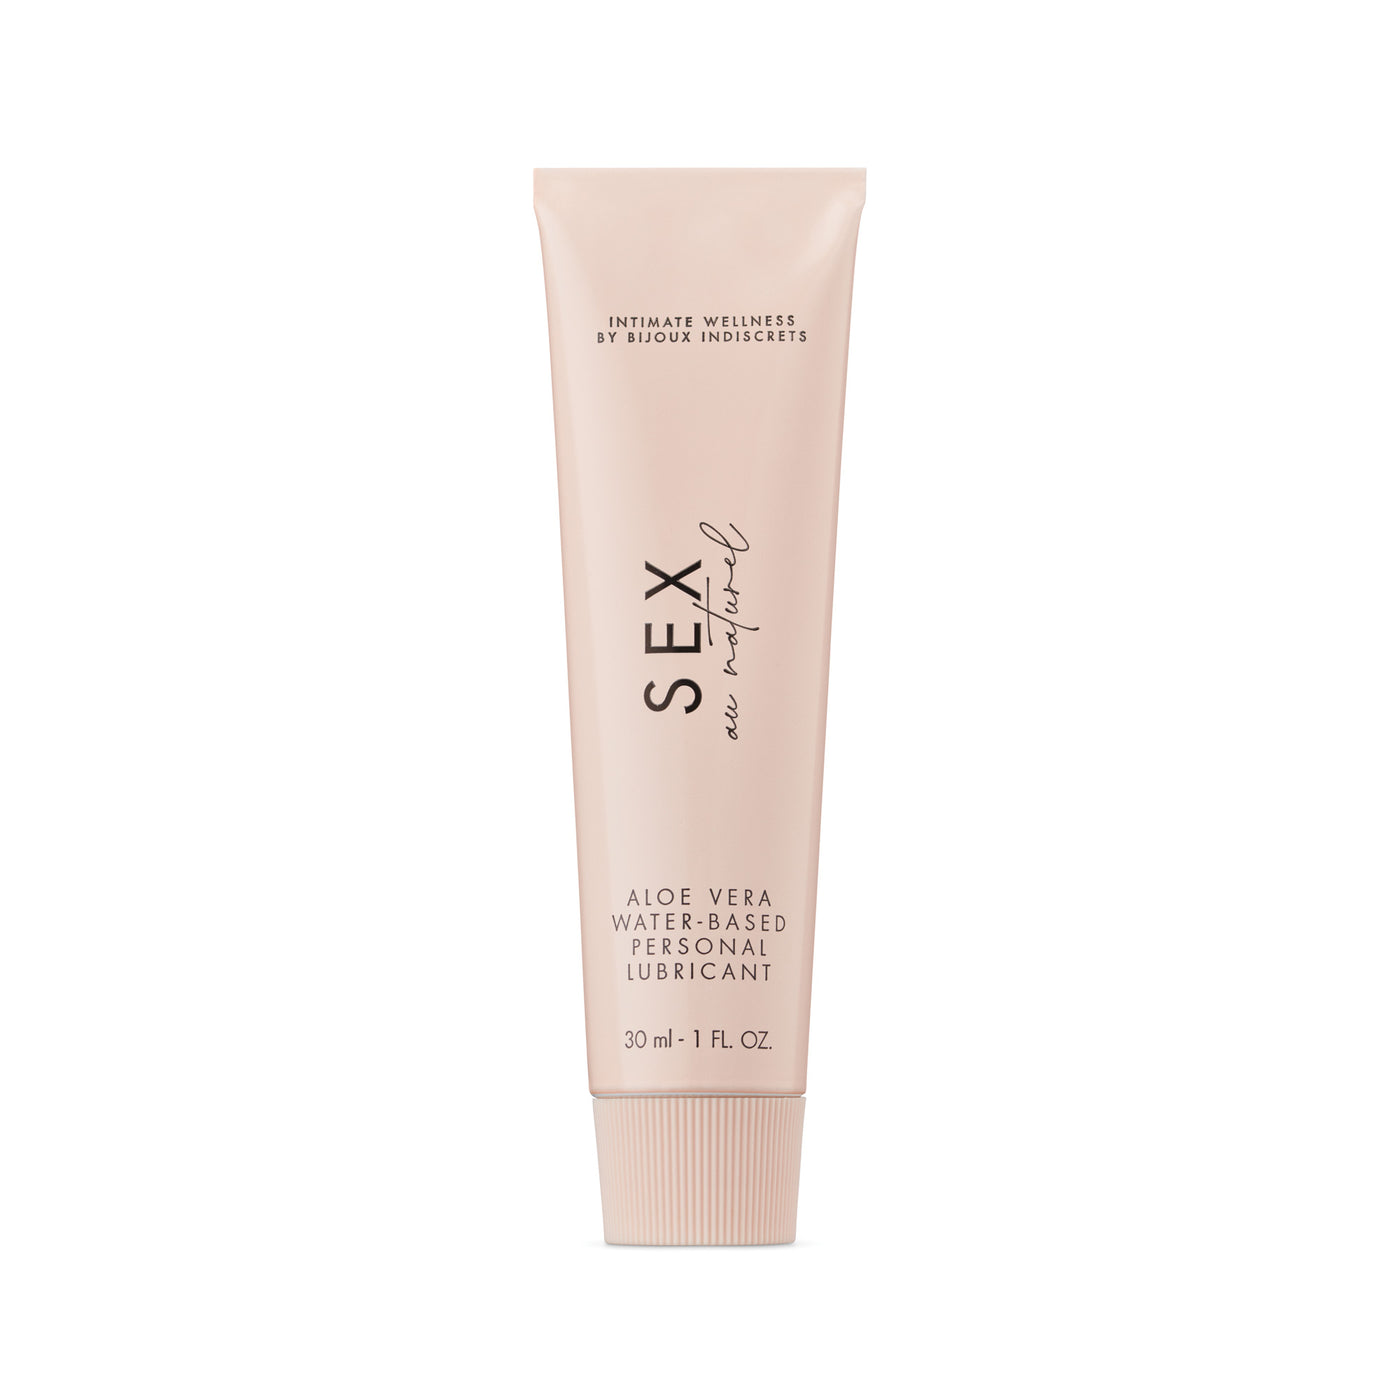 SEX AU NATUREL - WATER-BASED LUBRICANT WITH ALOE VERA